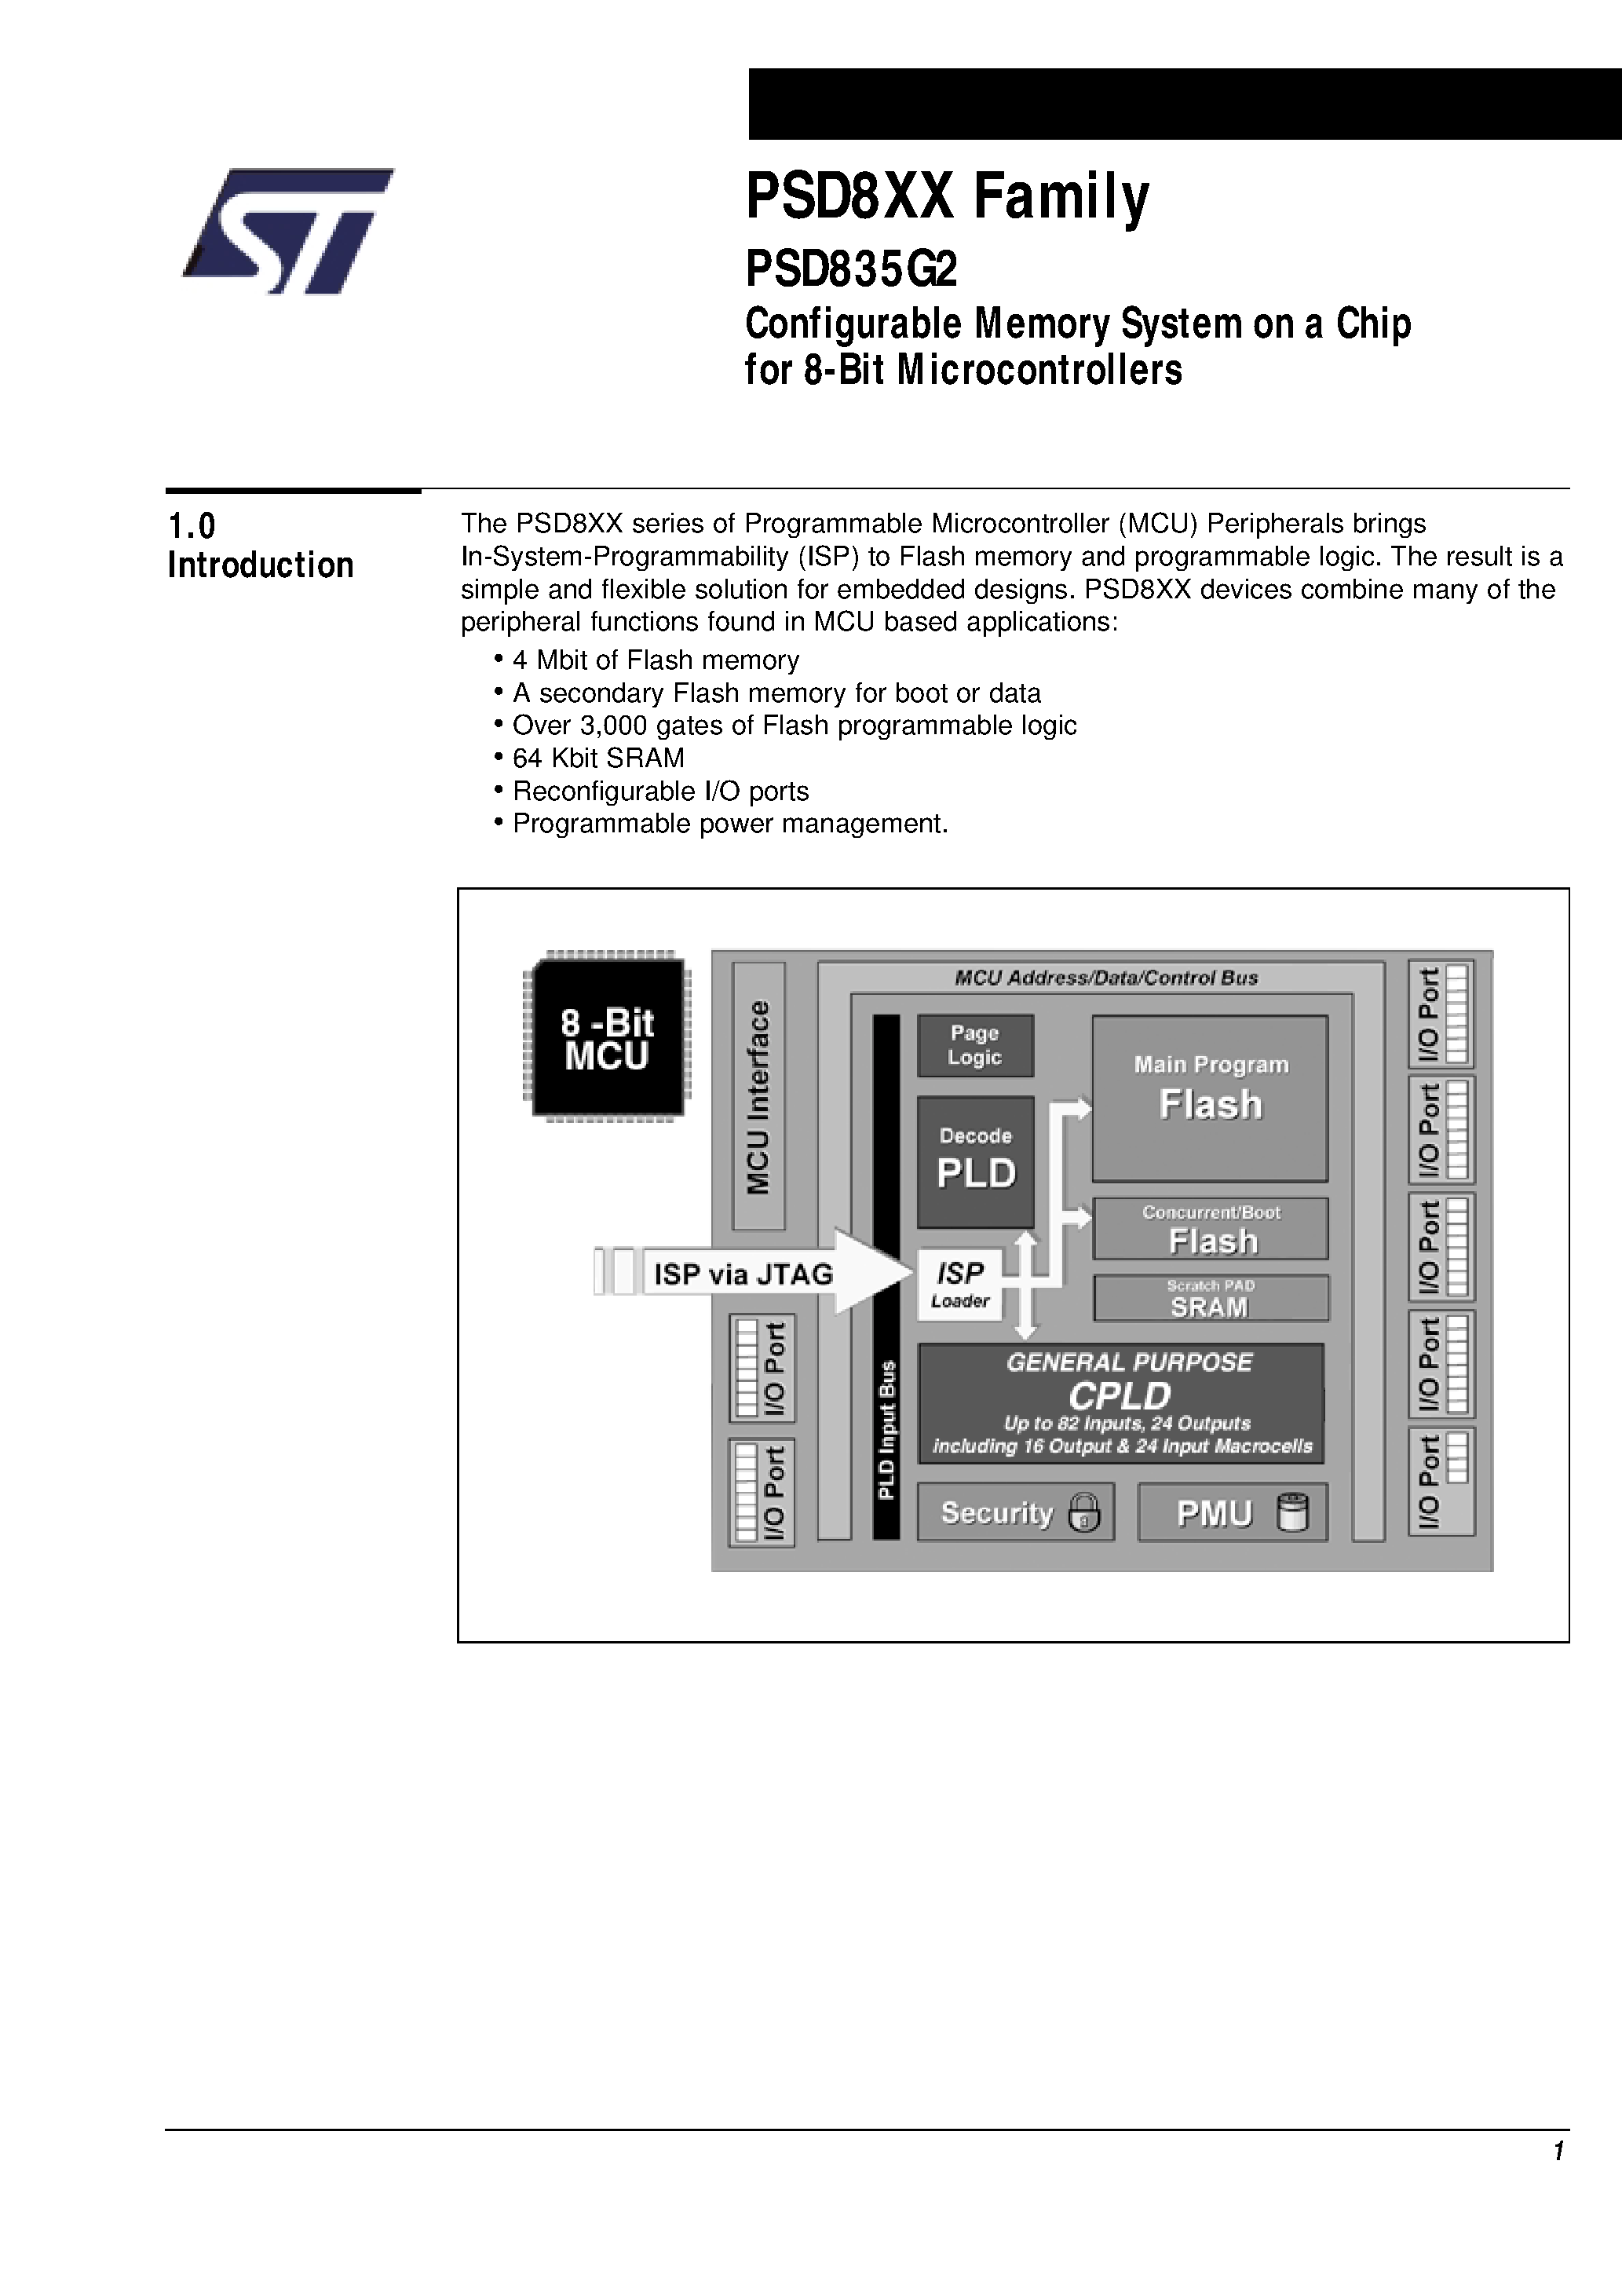 Datasheet PSD835F2-A-70MI - Configurable Memory System on a Chip for 8-Bit Microcontrollers page 2